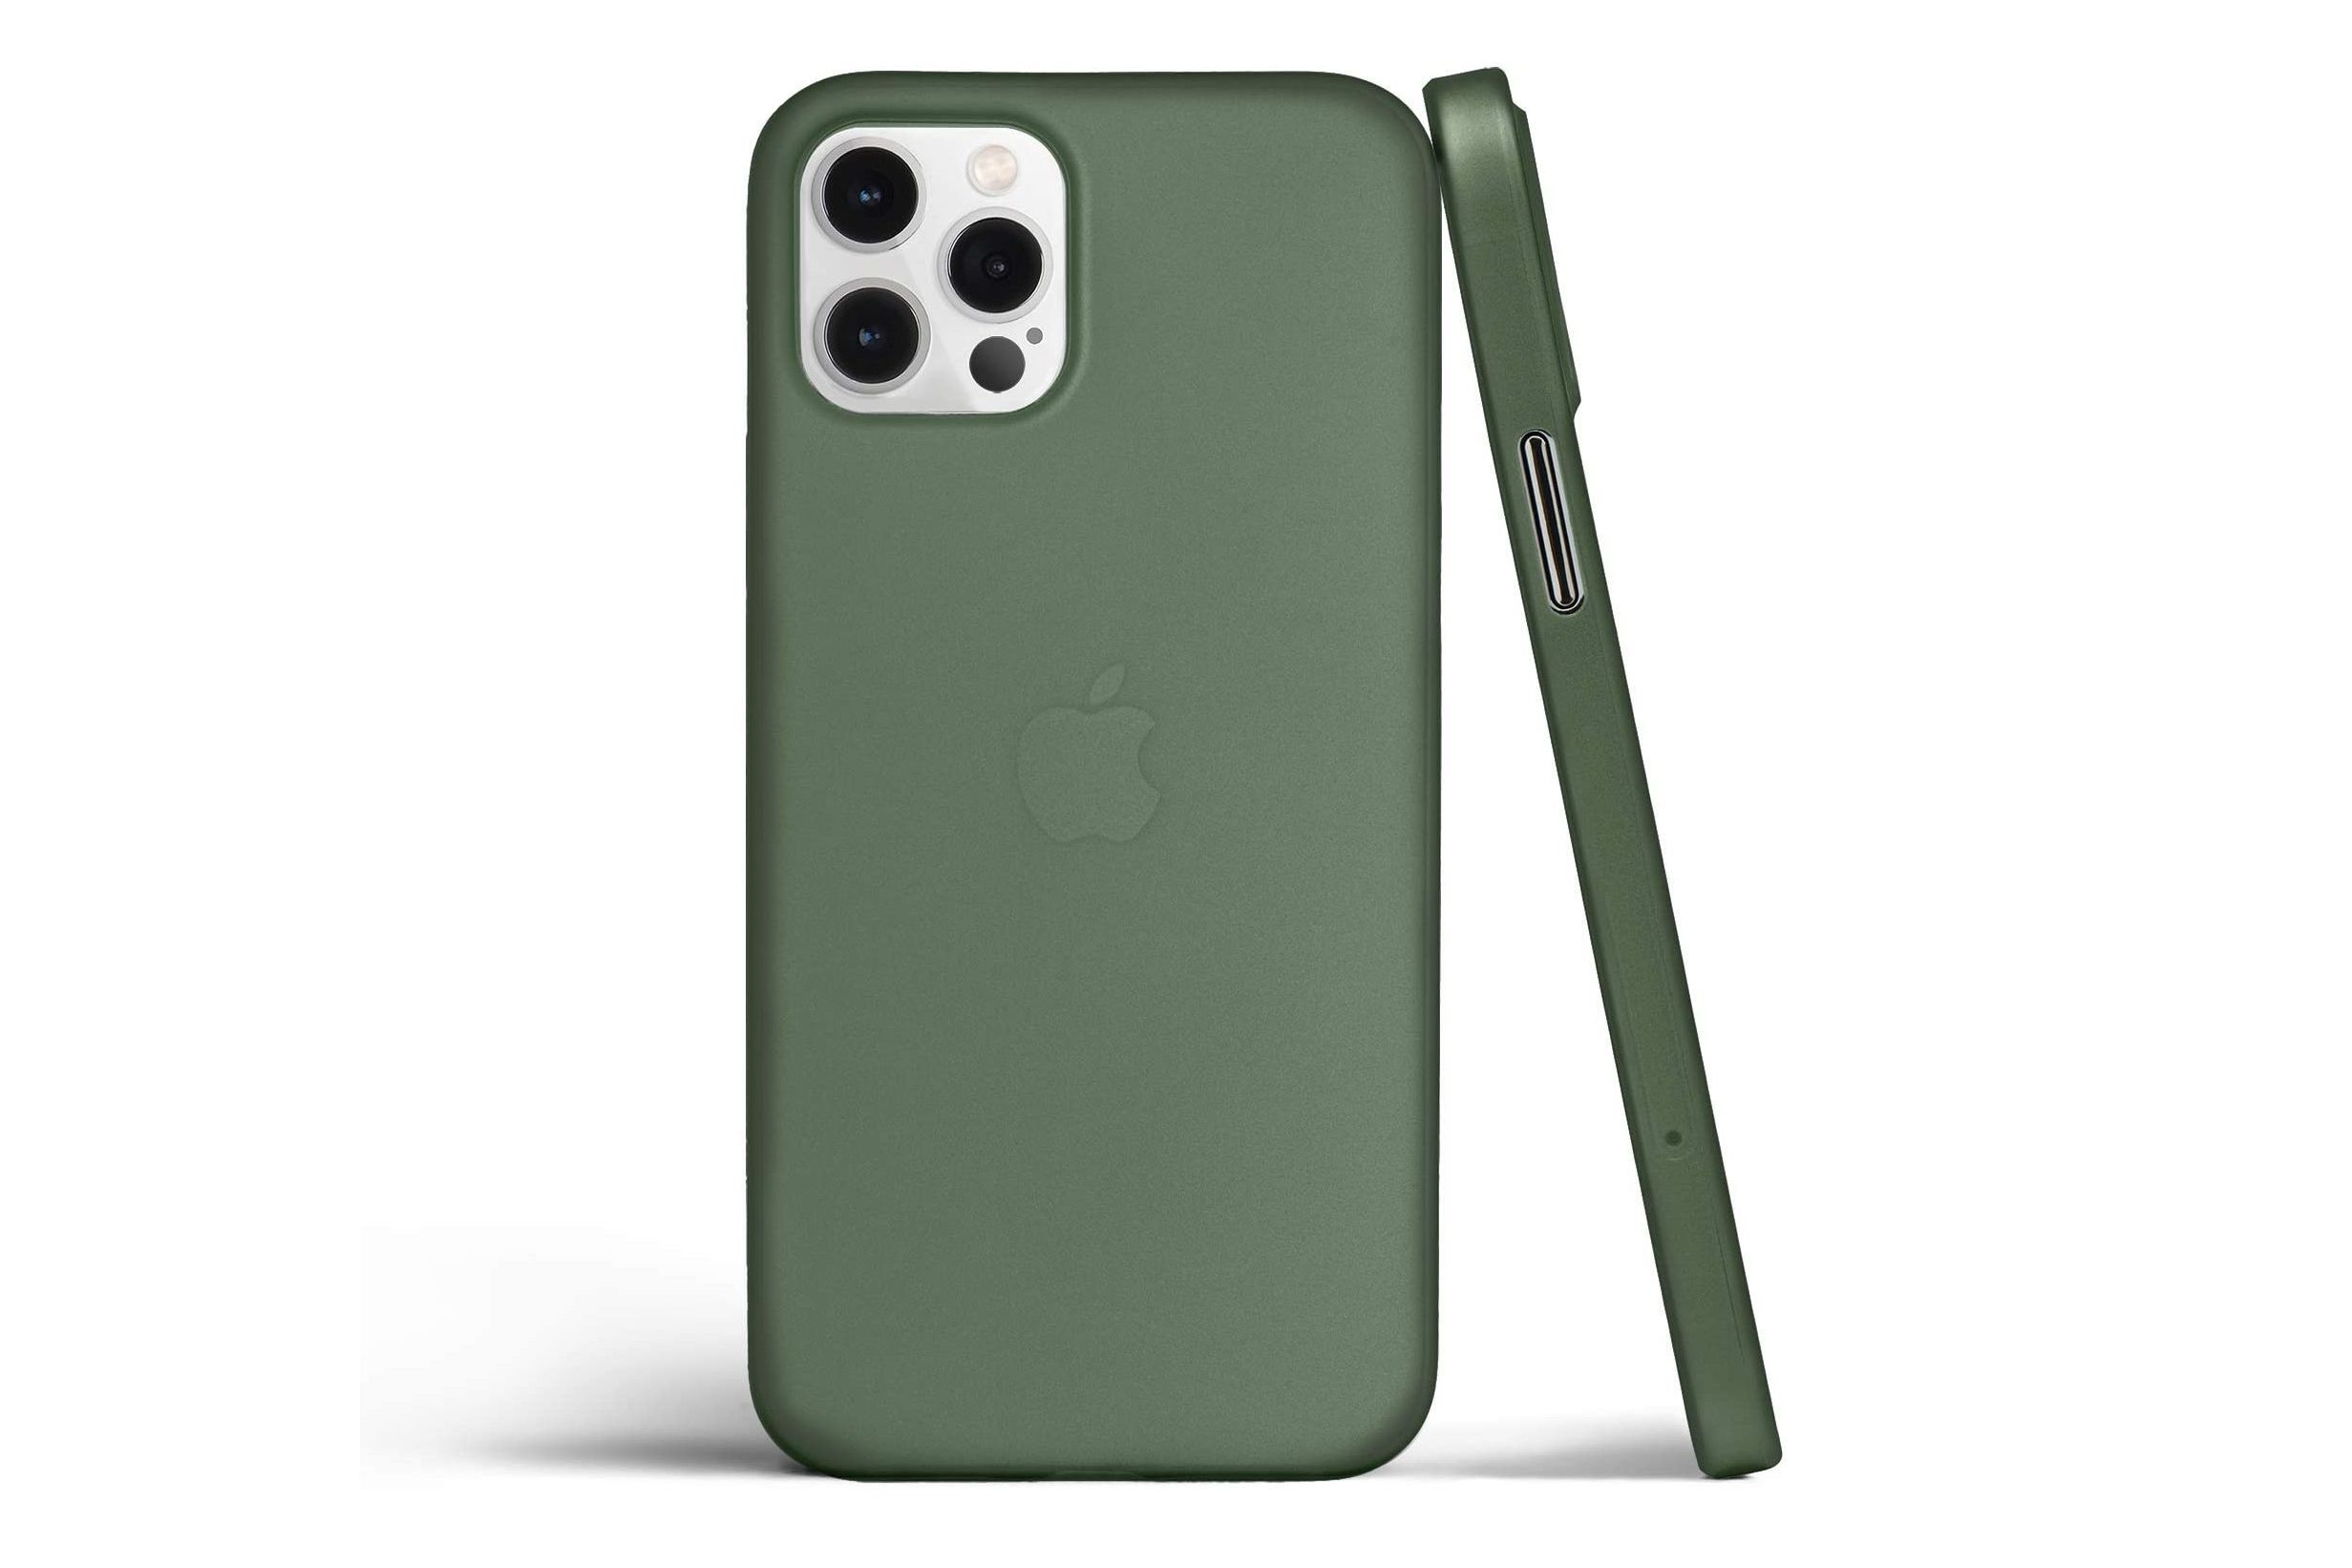 totallee Super Thin iPhone 12 case - The Best iPhone 12 and 12 Pro cases - updated August 2022